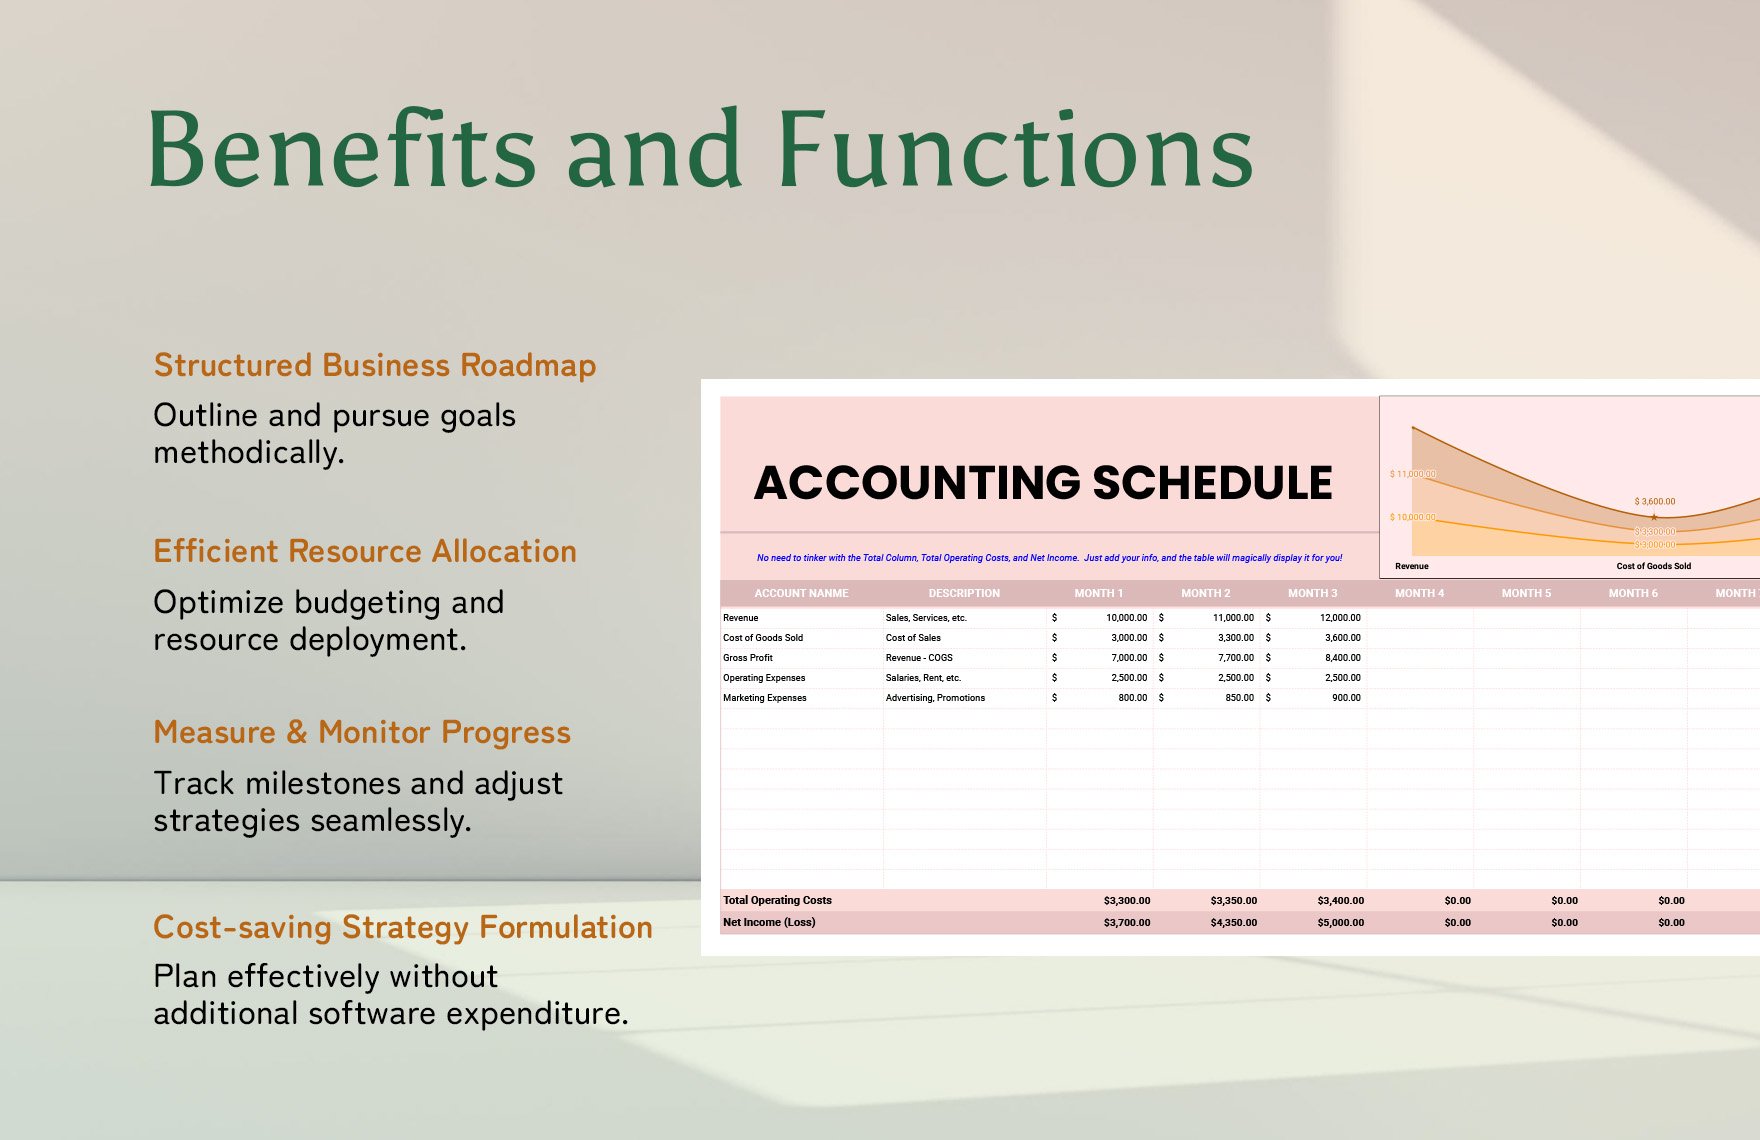 Accounting Schedule Template